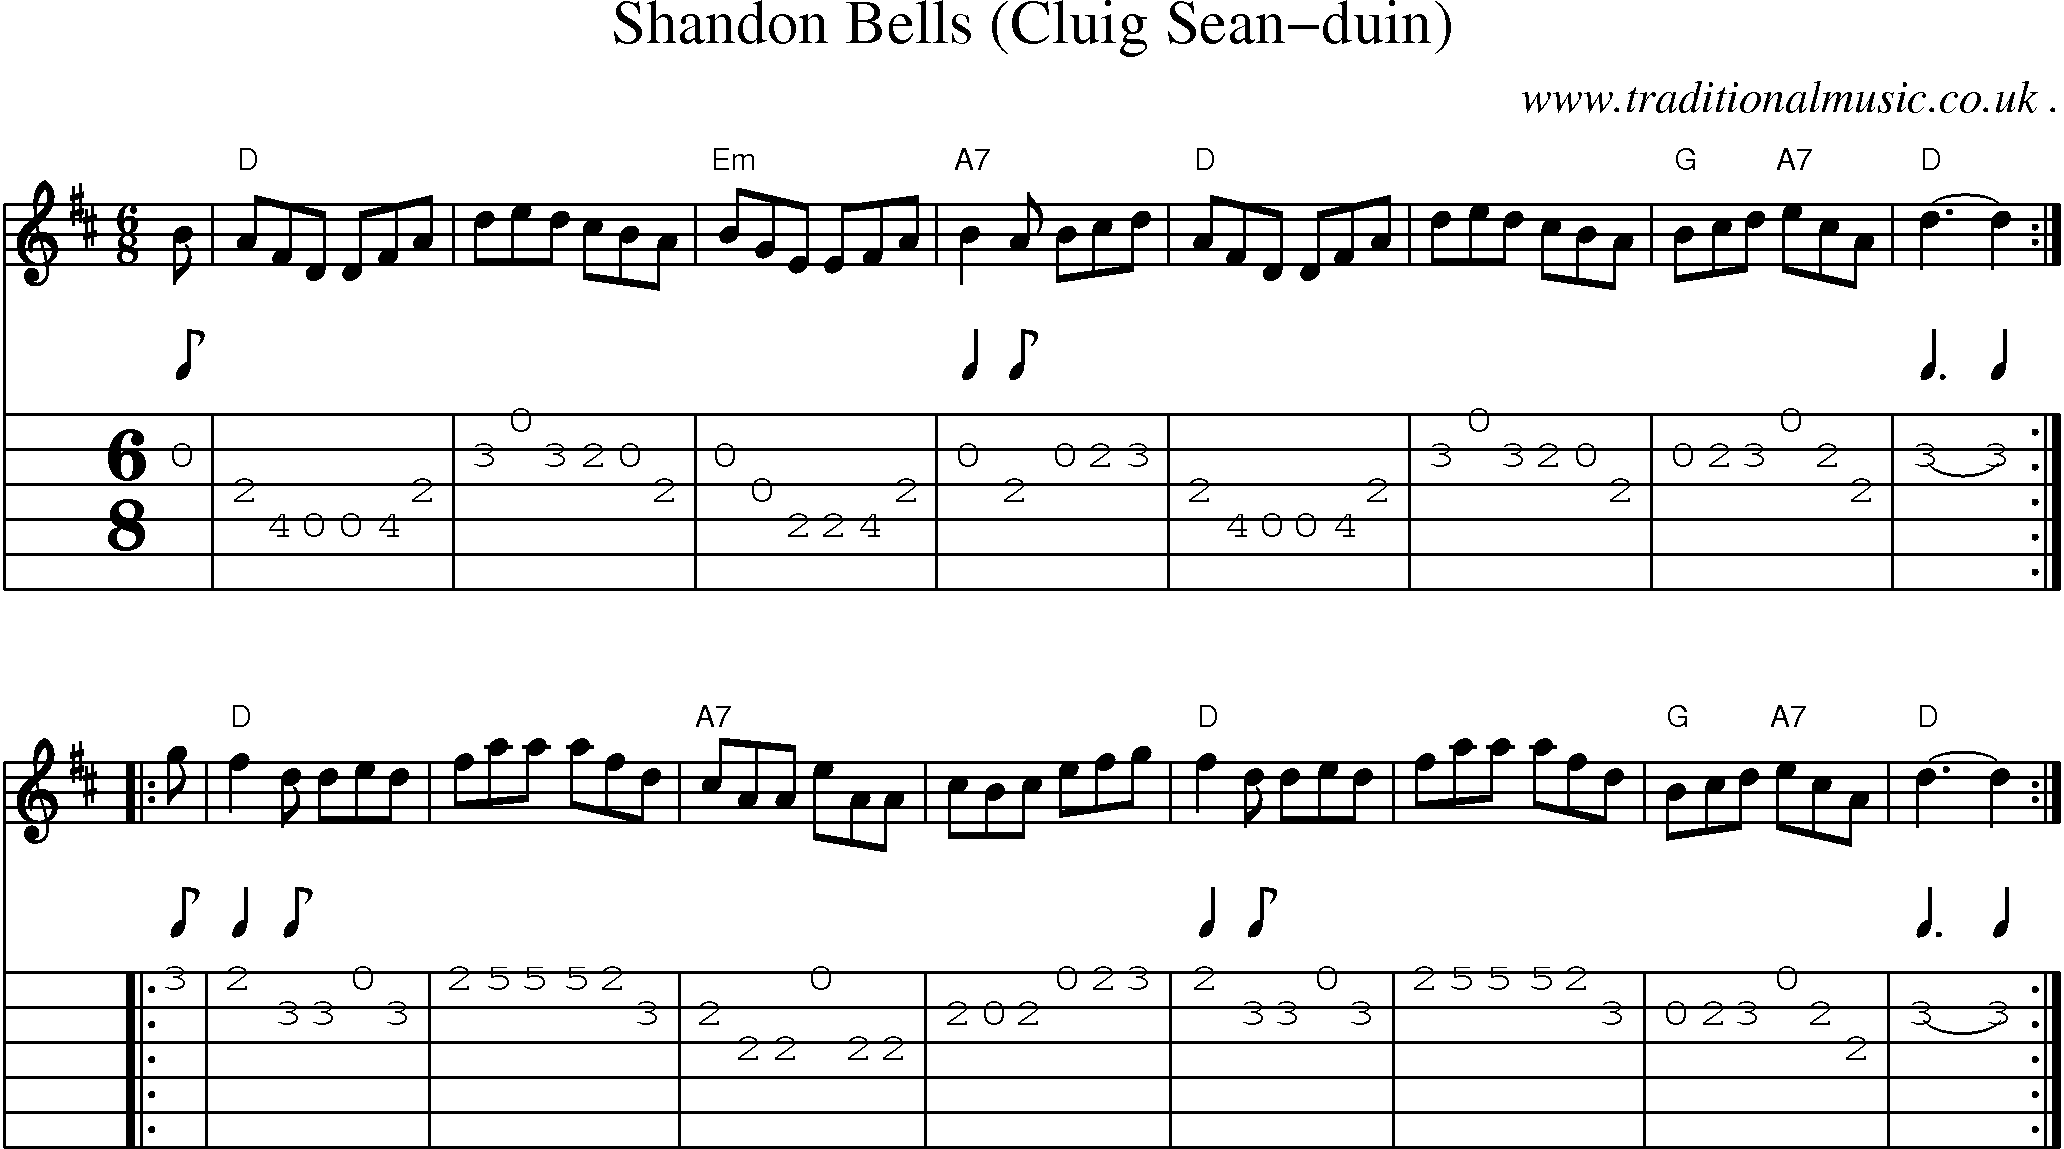 Sheet-music  score, Chords and Guitar Tabs for Shandon Bells Cluig Sean-duin